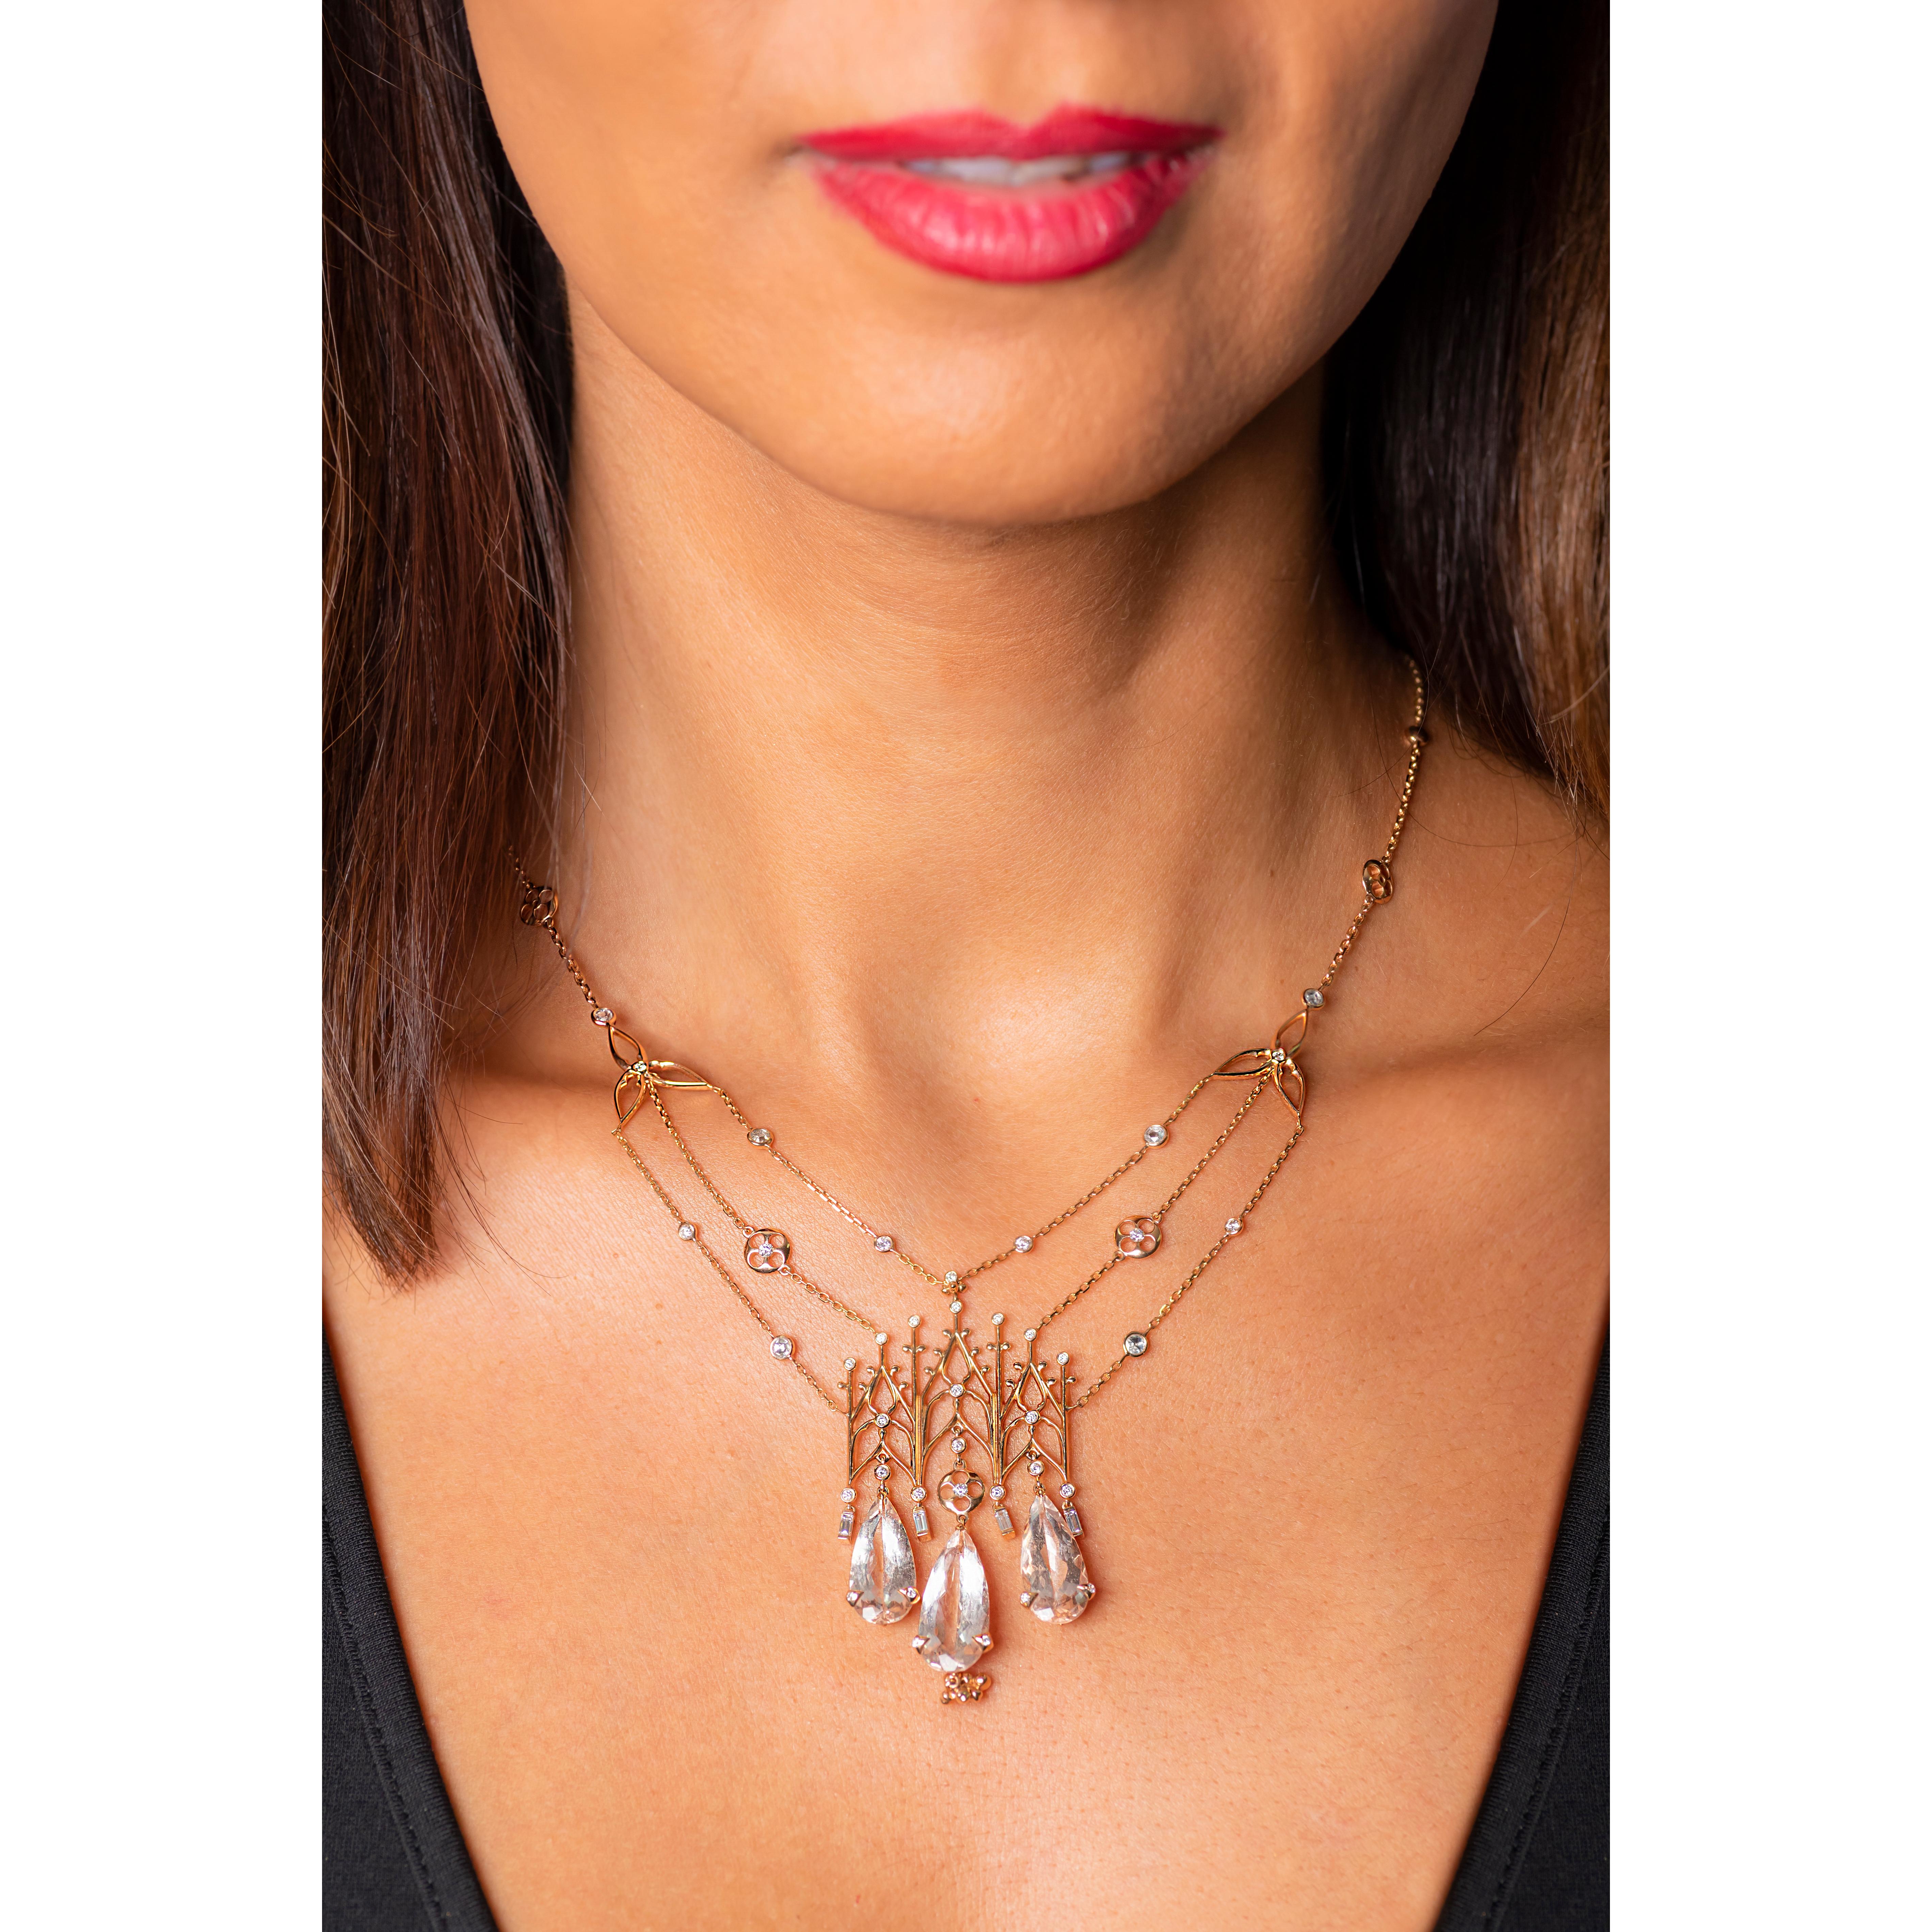 White Diamonds (Princess/Rose Cut and Baguette) 1.90 cts, Morganite Pear Shape 4 pcs 14.72 cts      
                              
This delicate rose gold  necklace takes its name from the italian“ Falconature“ a group of roof decorations, composed